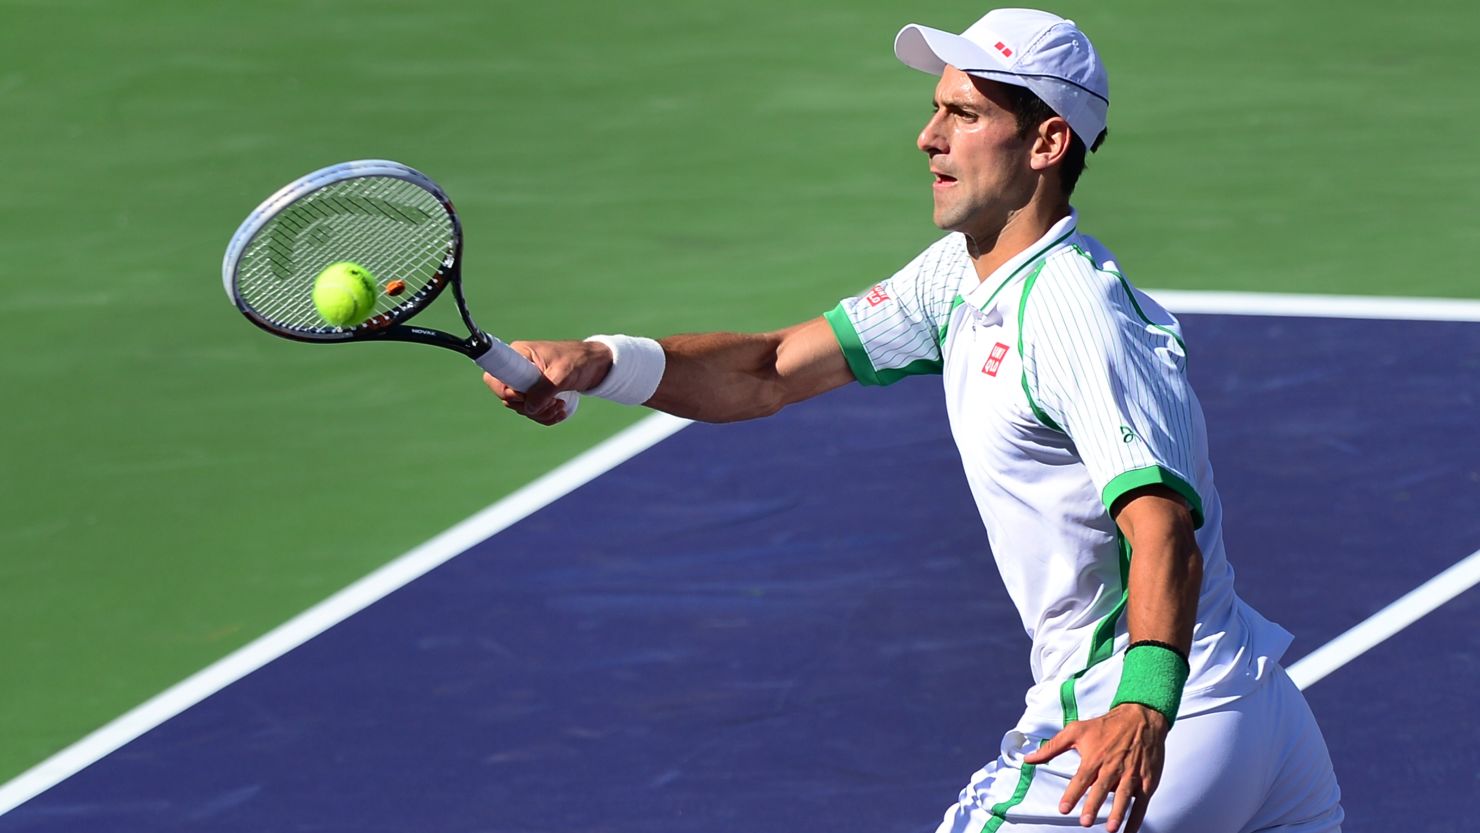 Novak Djokovic will wait until Tuesday before deciding whether to take part in the Monte Carlo Masters.